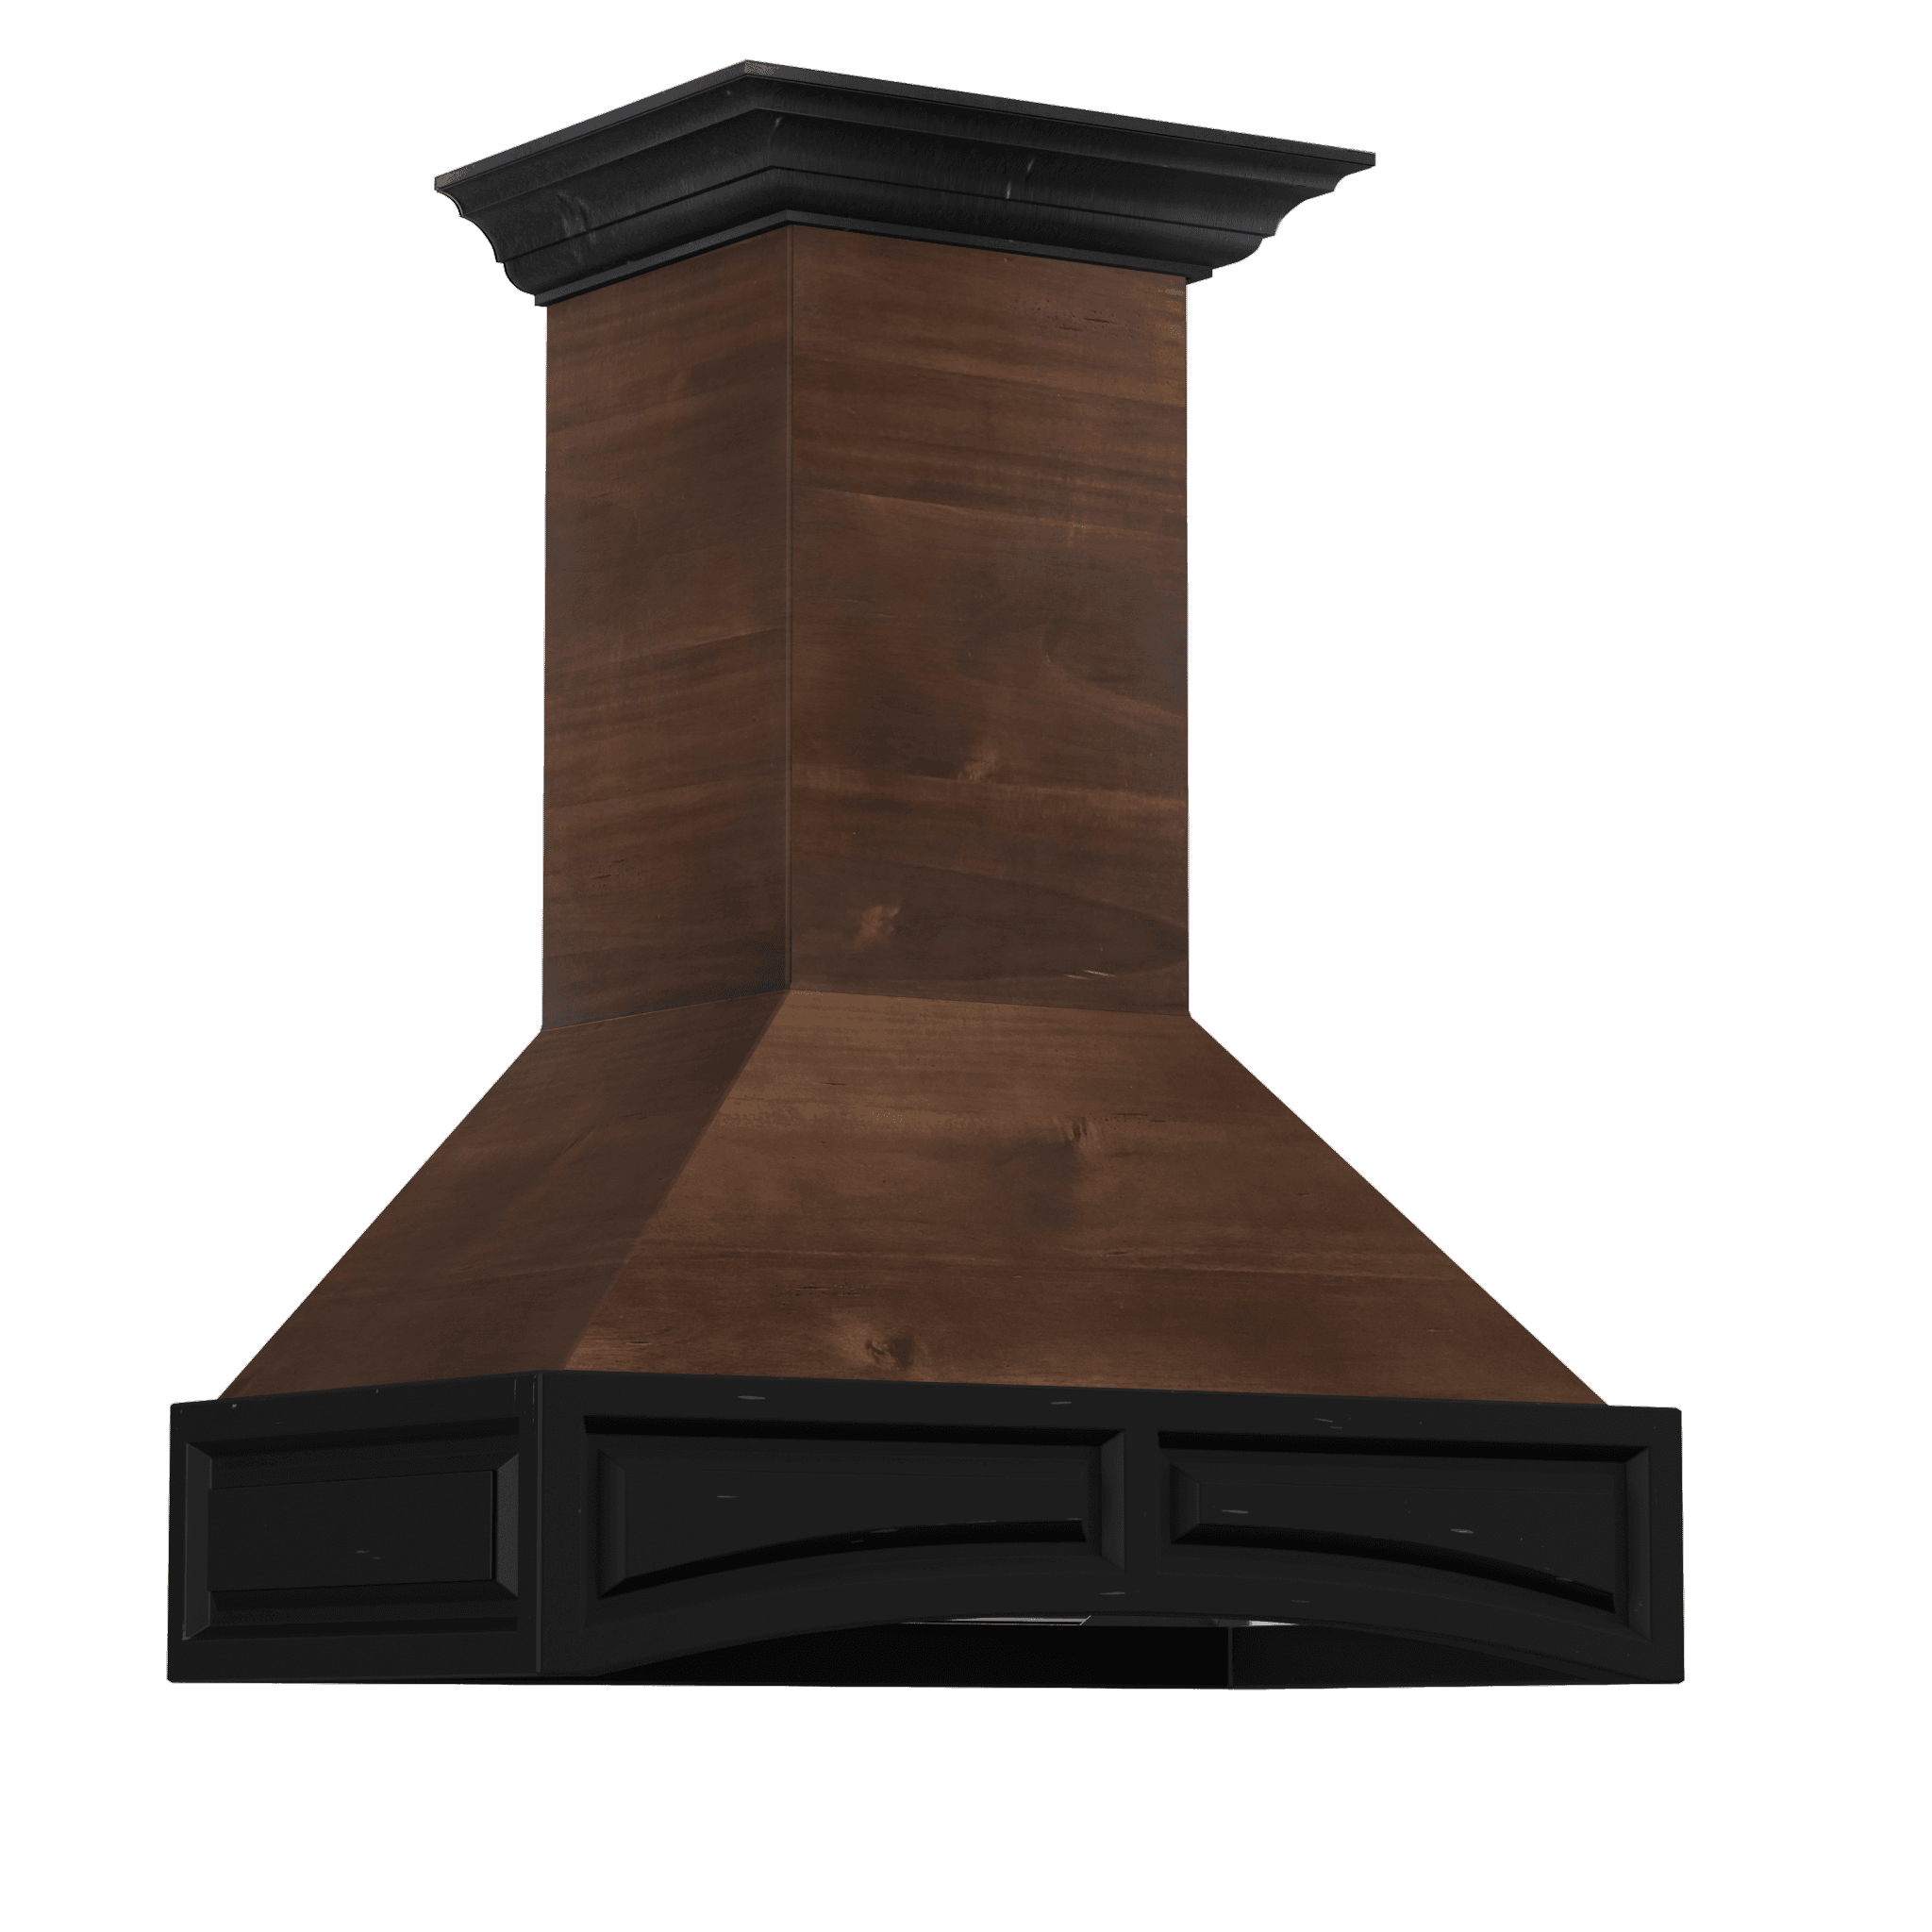 ZLINE KITCHEN AND BATH 321ARRD42 ZLINE Wooden Wall Mount Range Hood in Antigua and Walnut - Includes Dual Remote Motor Size: 42 Inch, CFM: 700